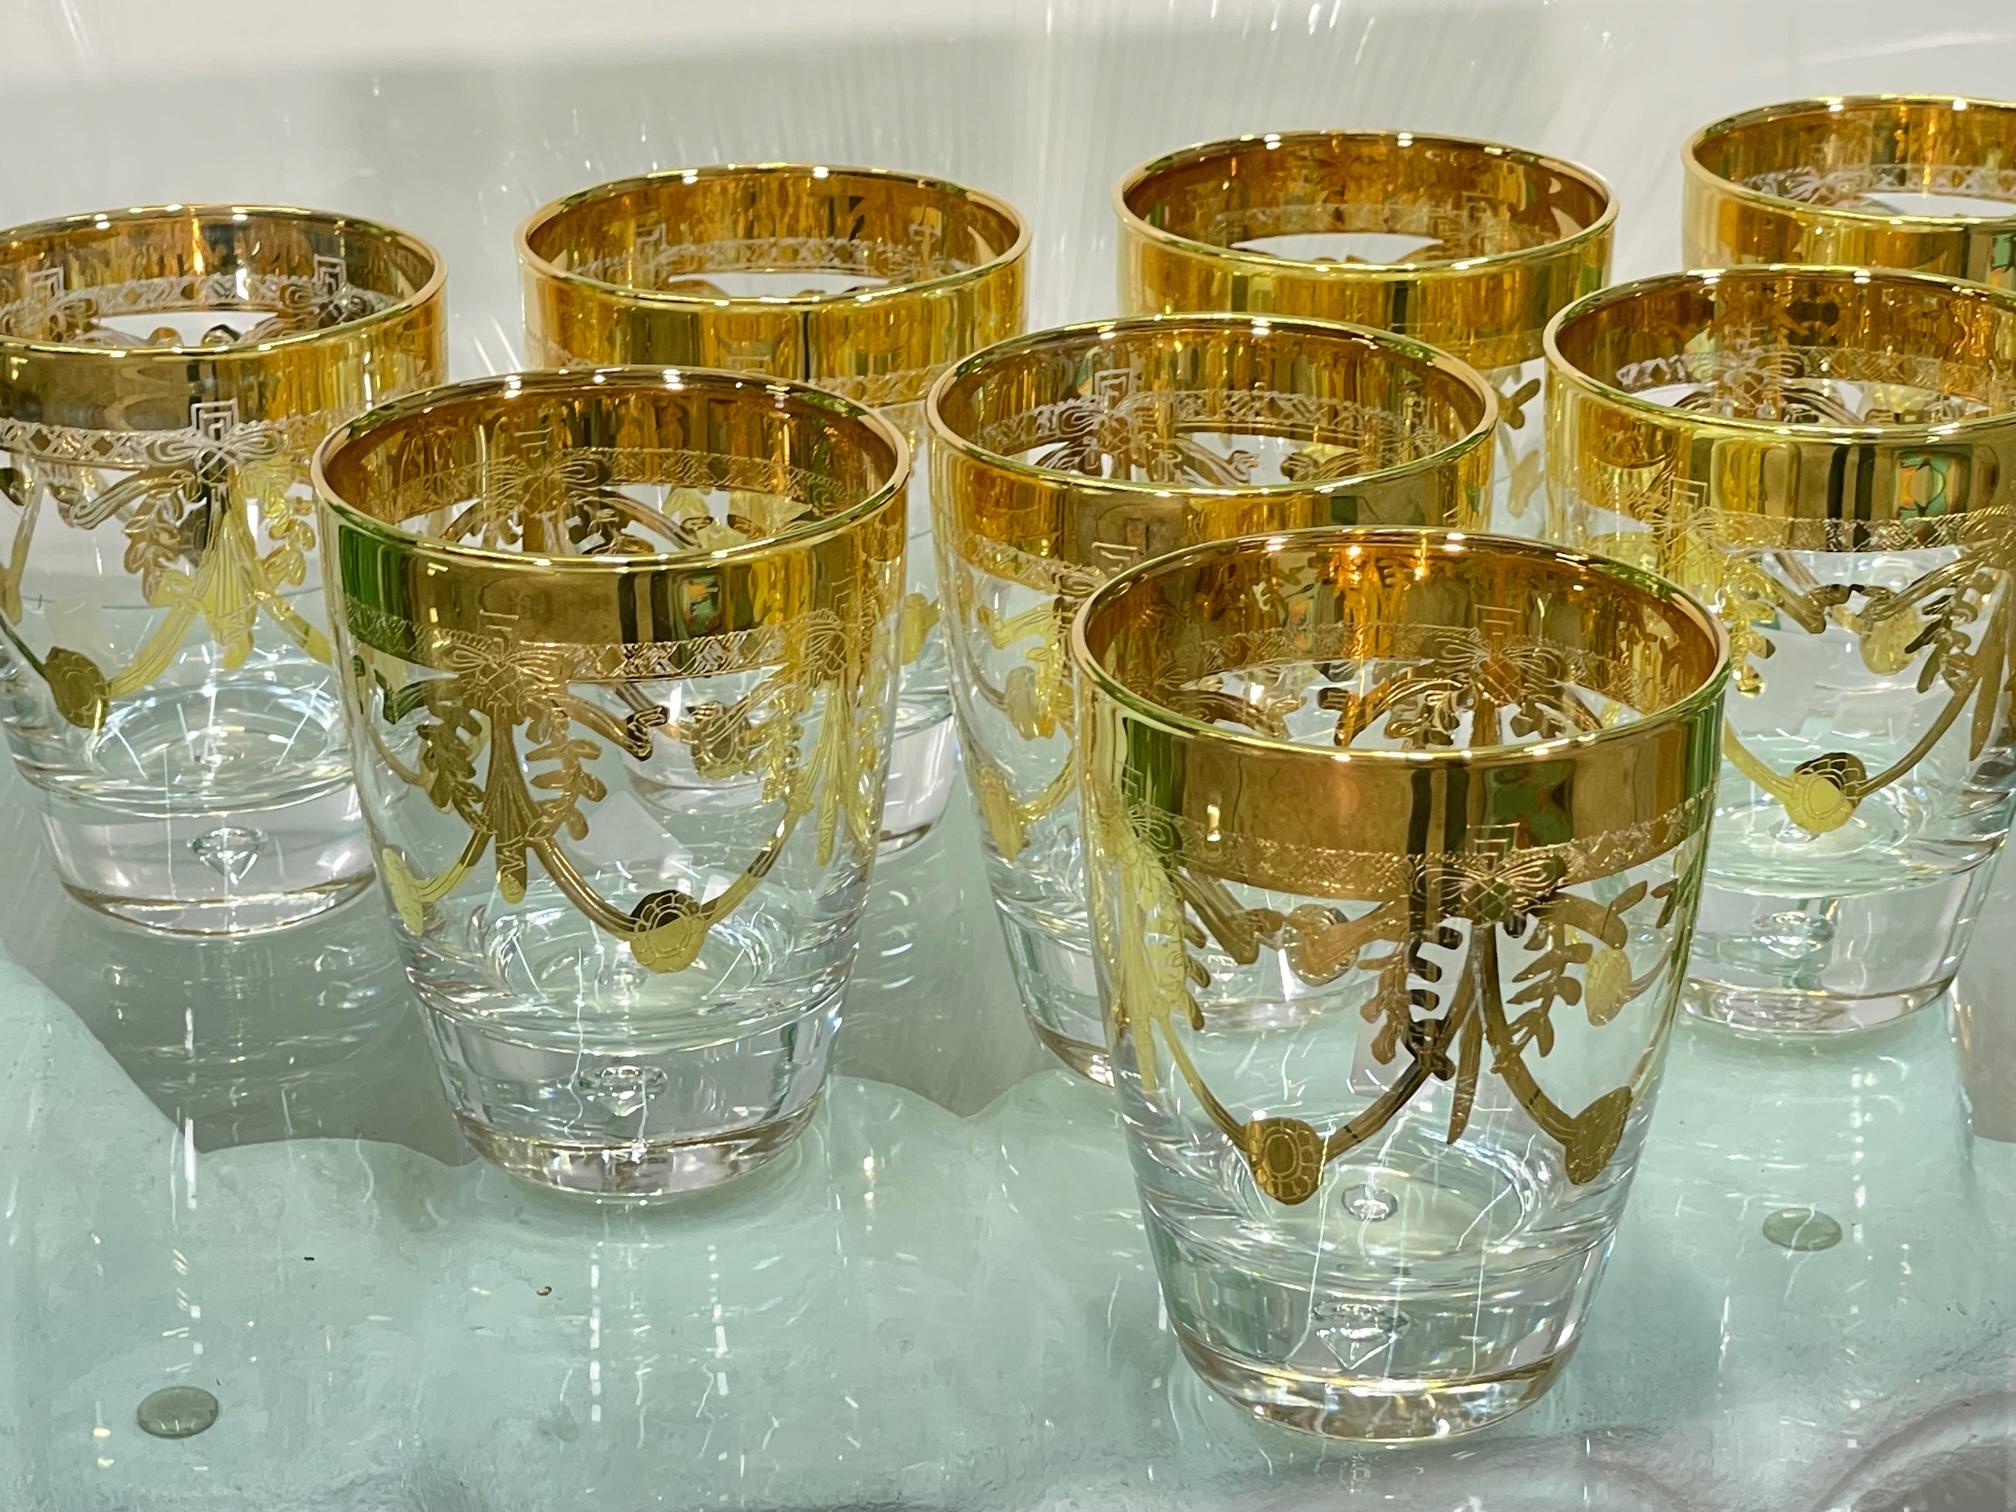 Set of 8 barware glasses by Creart feature gold leaf detailing and a heavy base with diamond shaped bubble inside. Made in Italy. In like new condition. 
For a shipping quote to your exact zip code, please message us.
